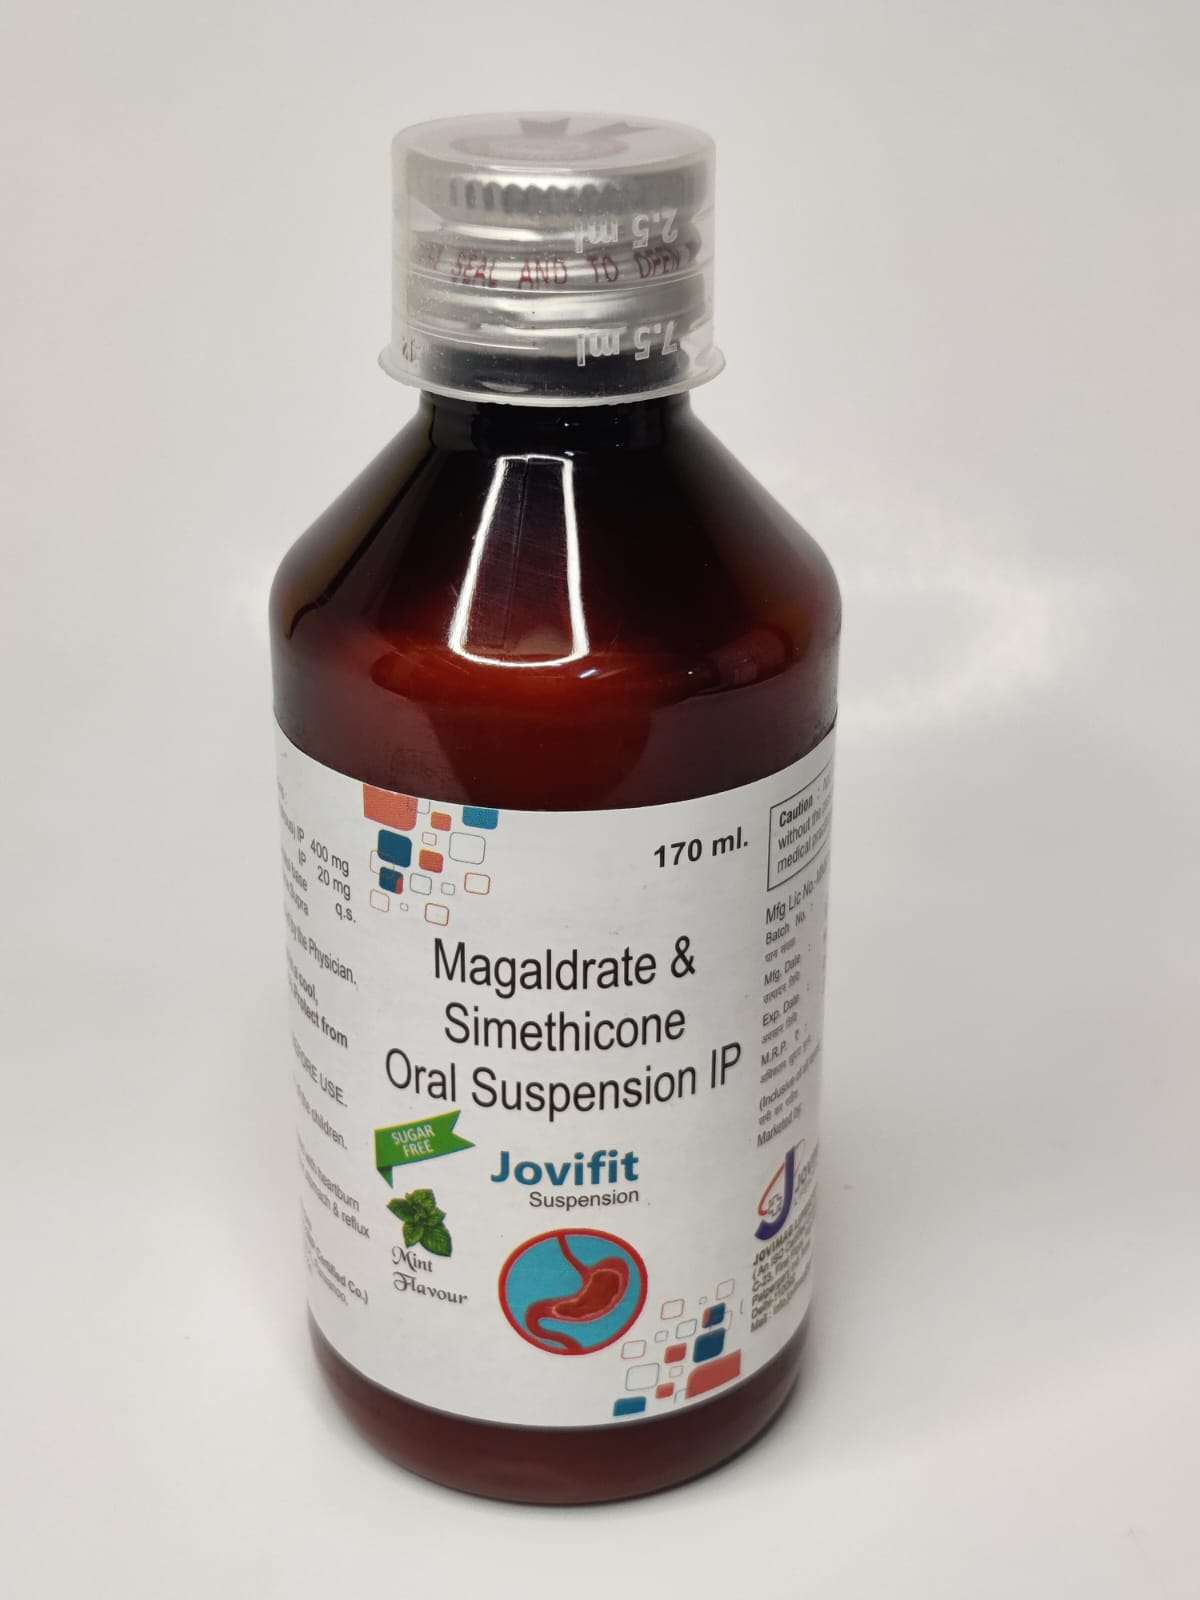 megaldrate 400 +simithicone 20 mg (sugar free)